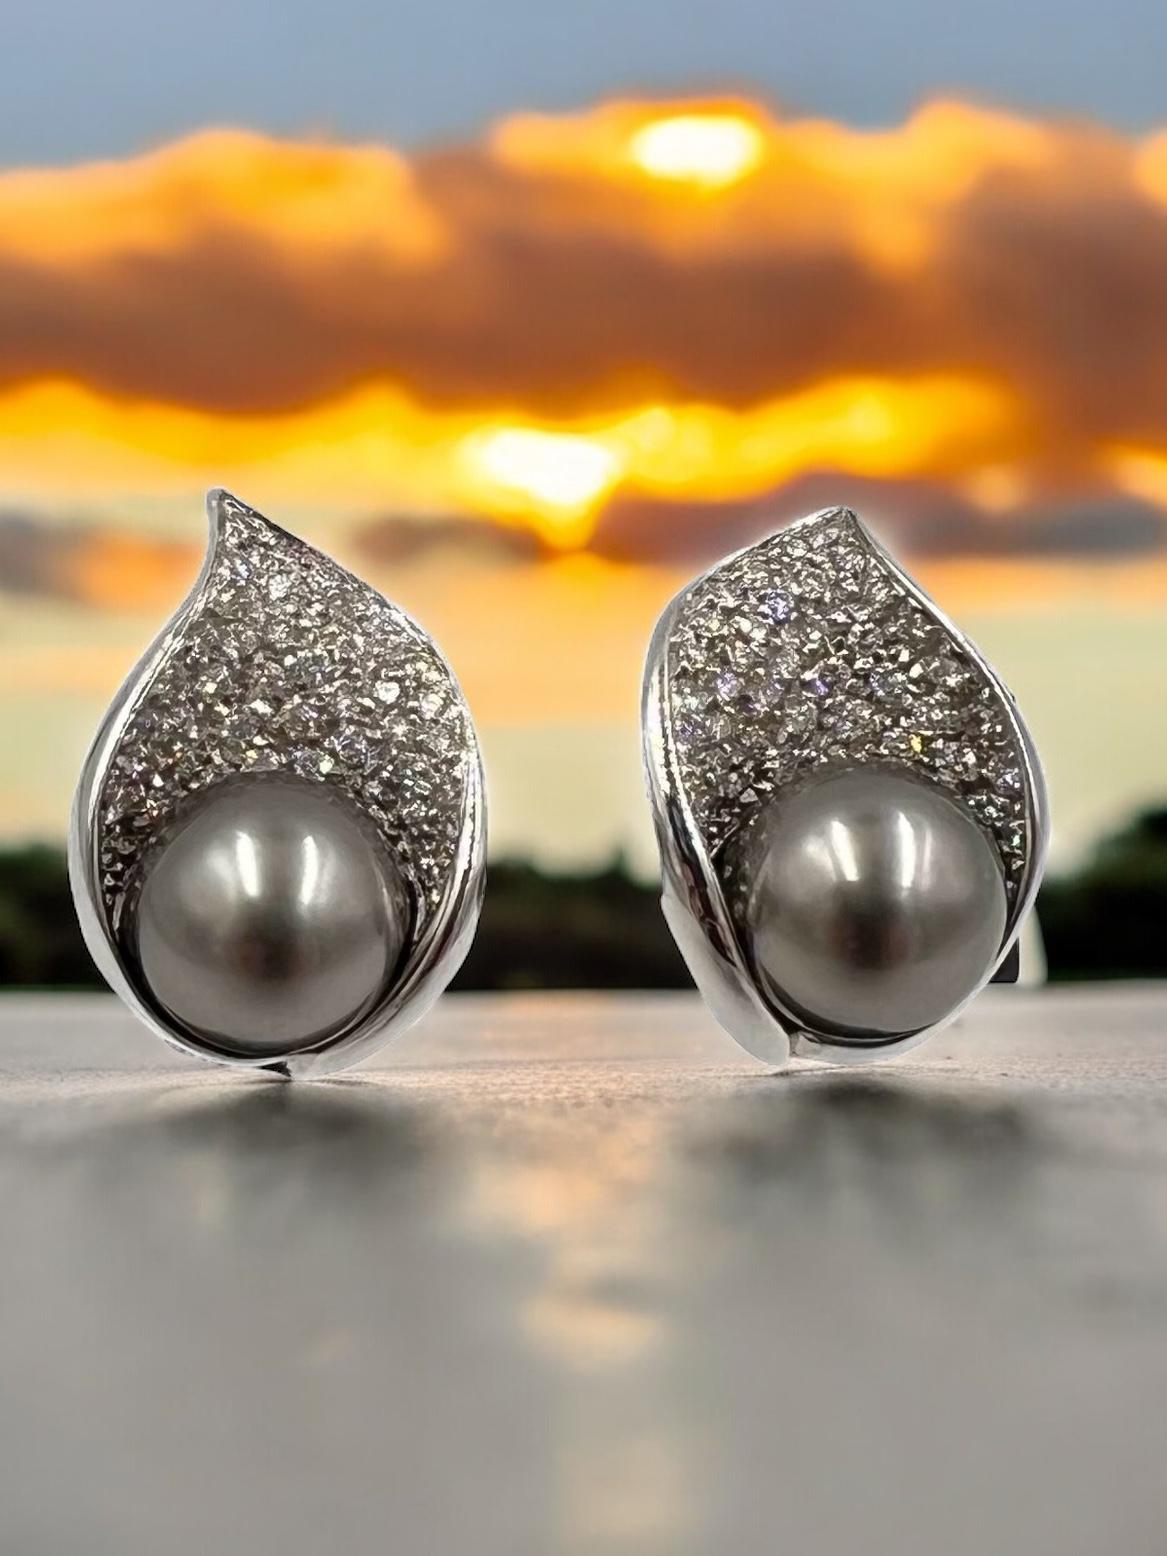 Mastoloni Tahitian pearl and diamond white gold earrings.

  These unusual Mastoloni clam-shell designed diamond pave earrings are each nestled with a Tahitian pearl.  All made in 18k white gold.  The lustrous silver grey 9 mm Tahitian pearls are